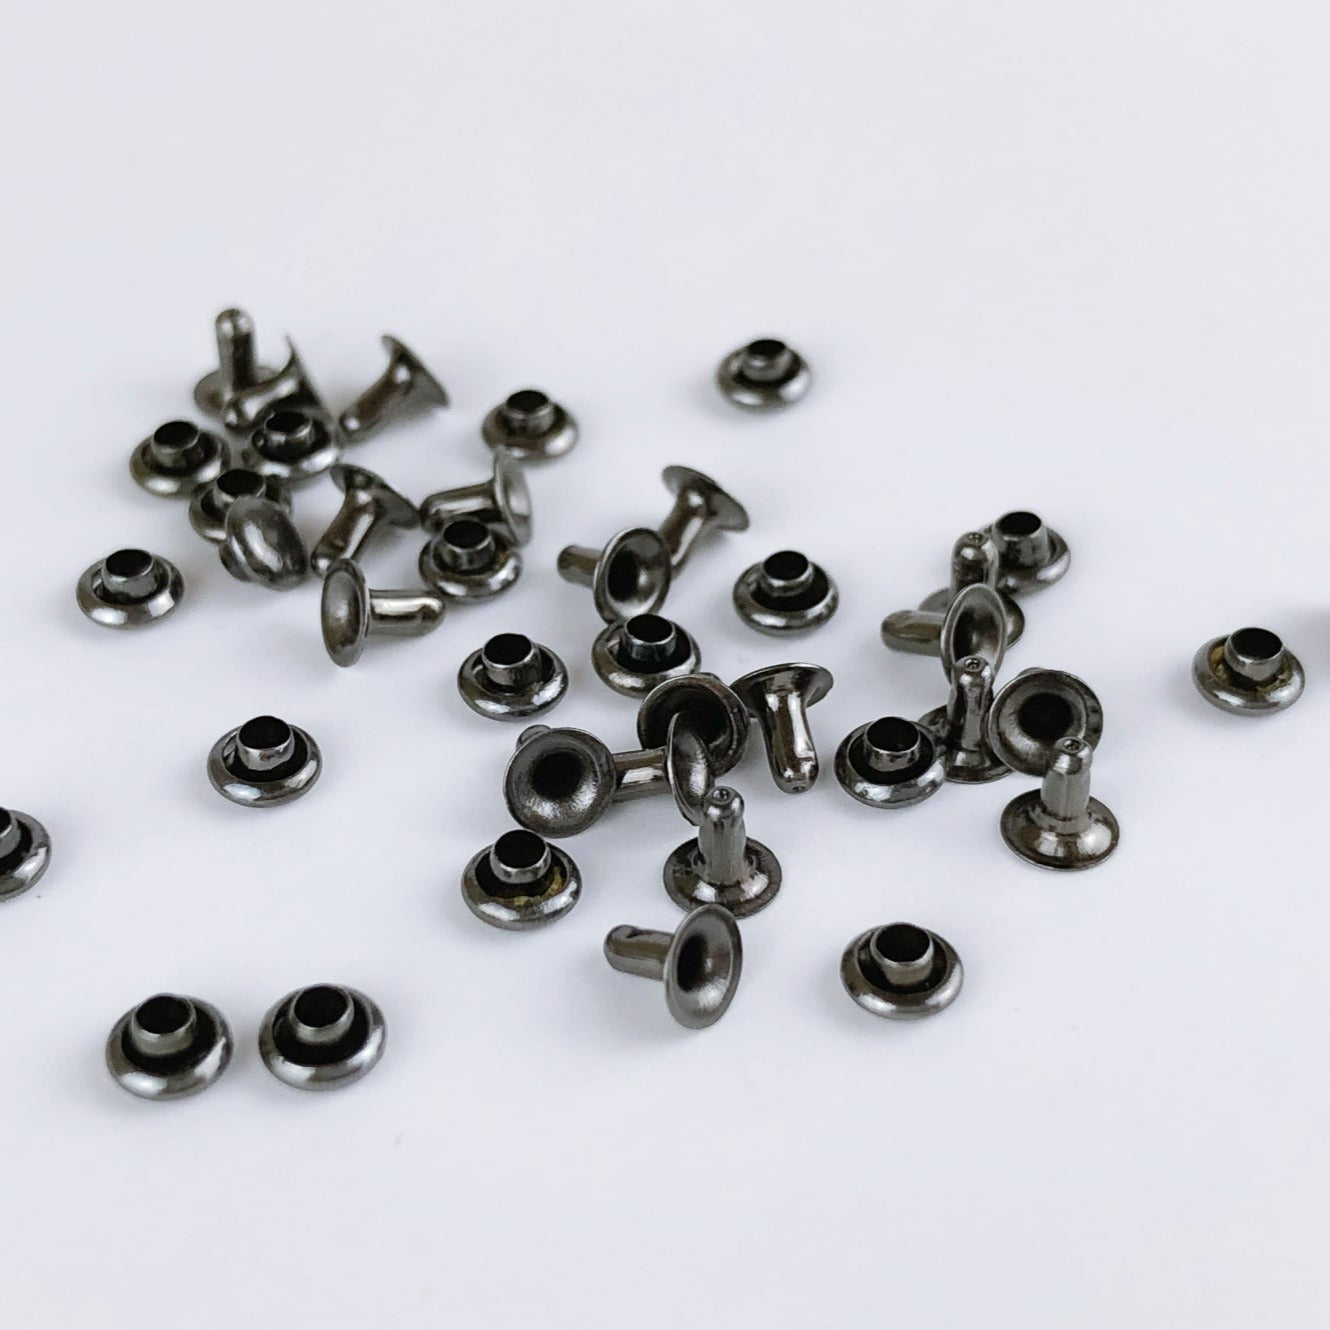 9mm Rivet (Without Apparatus) 33.5 Single Rivet (in packages of 100 or 1000 pieces)